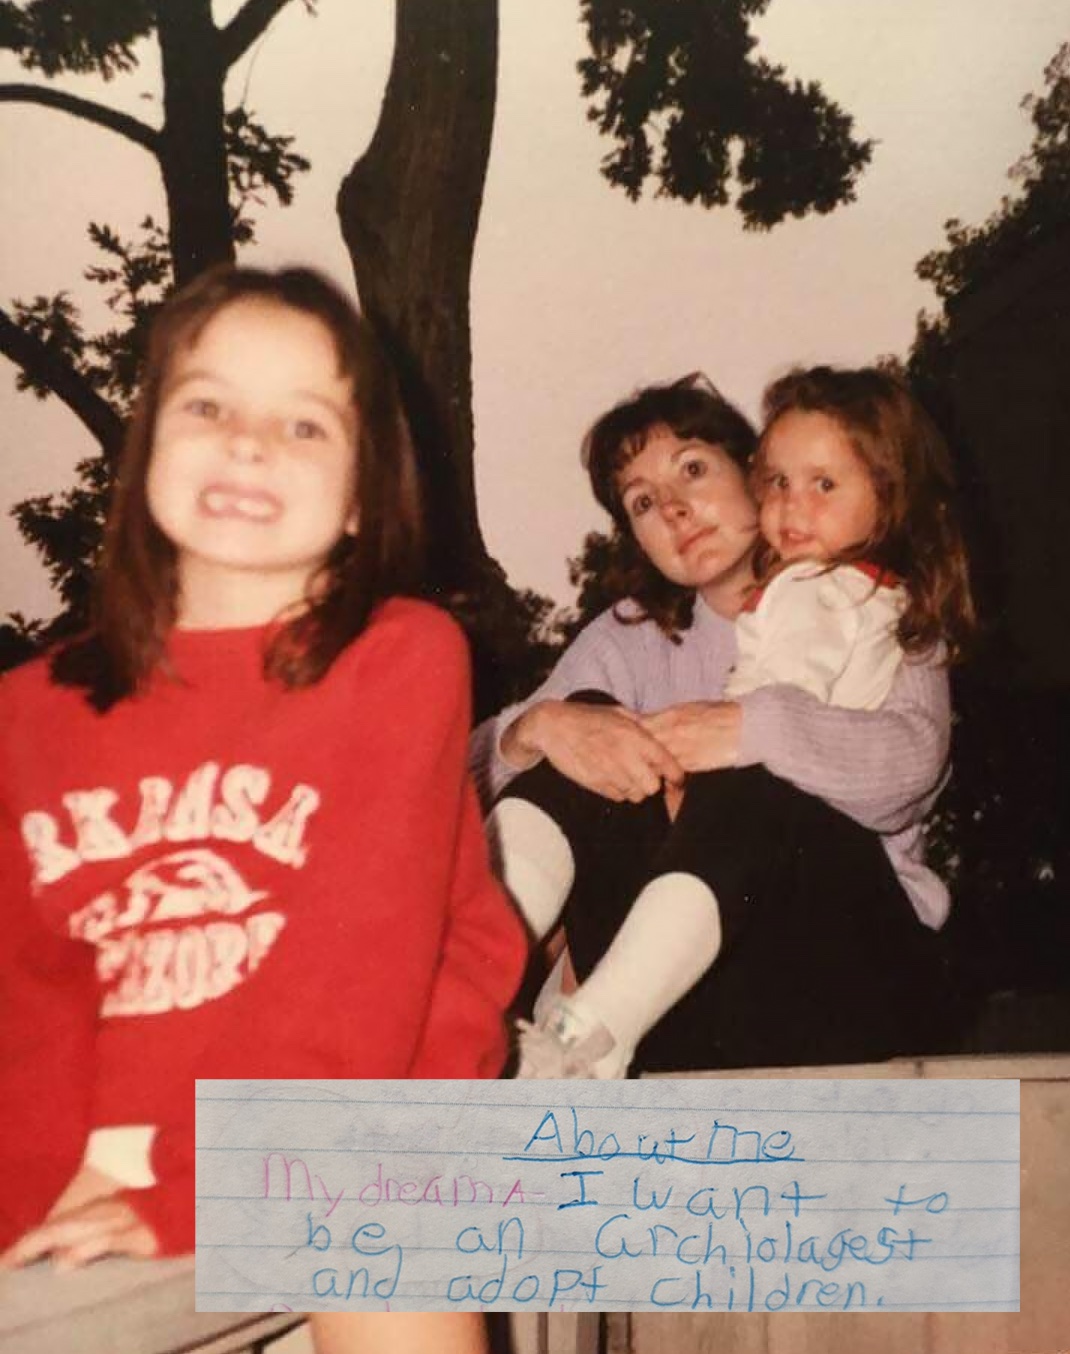 Dr. Vennarucci (front) as a child with her mother and sister (back), as well as her diary entry (foreground).